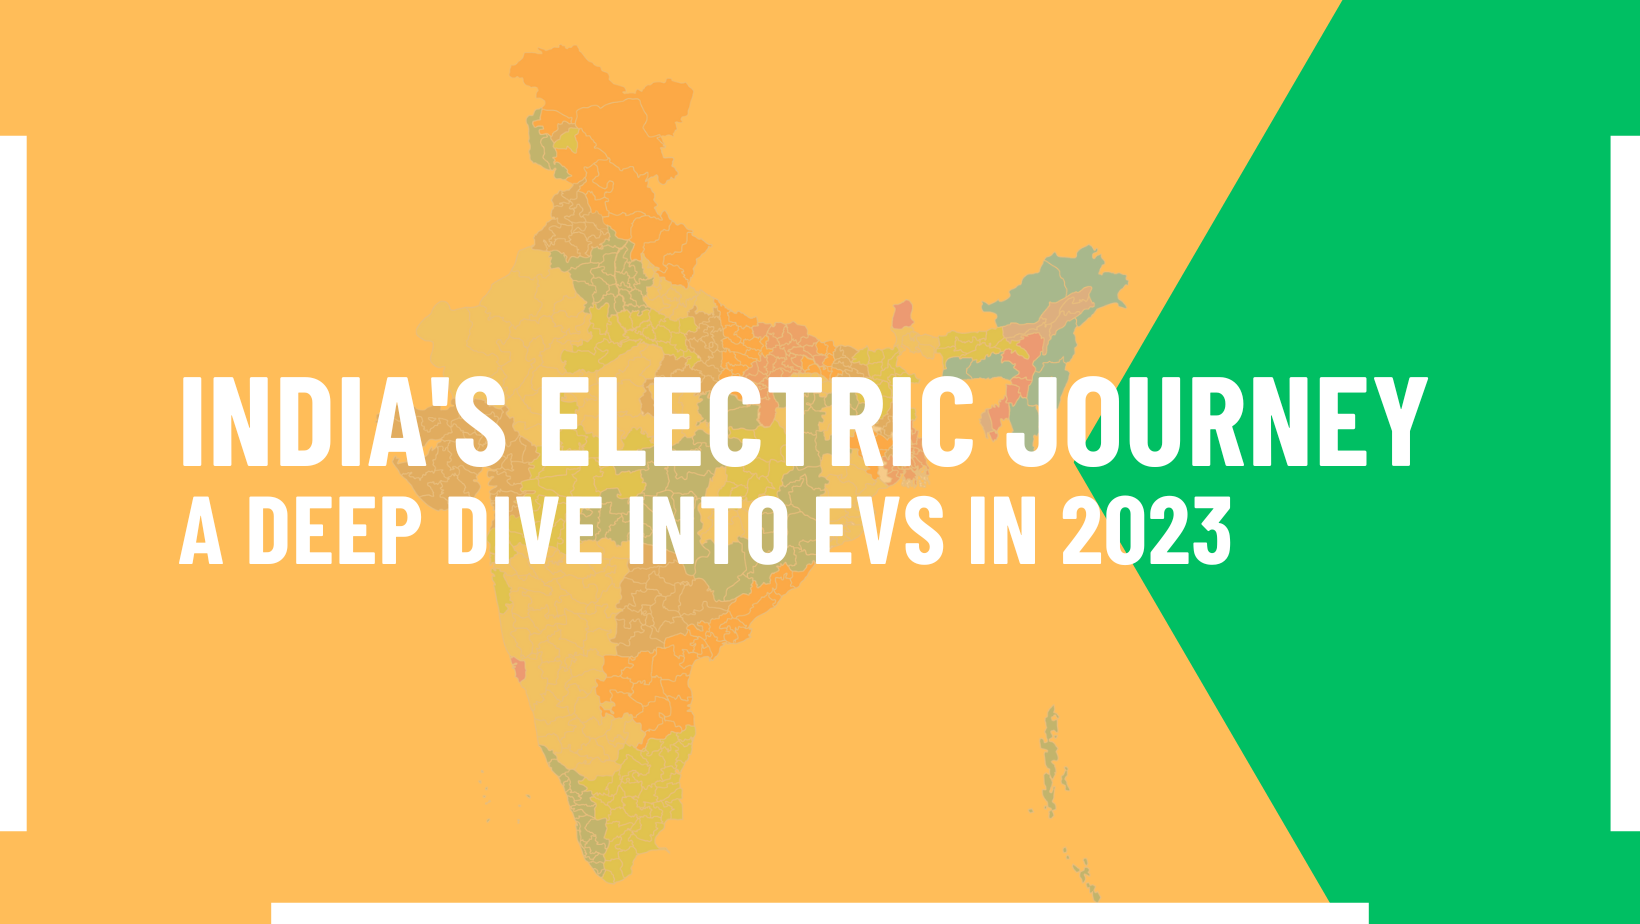 India's Electric Vehicles Journey in 2023